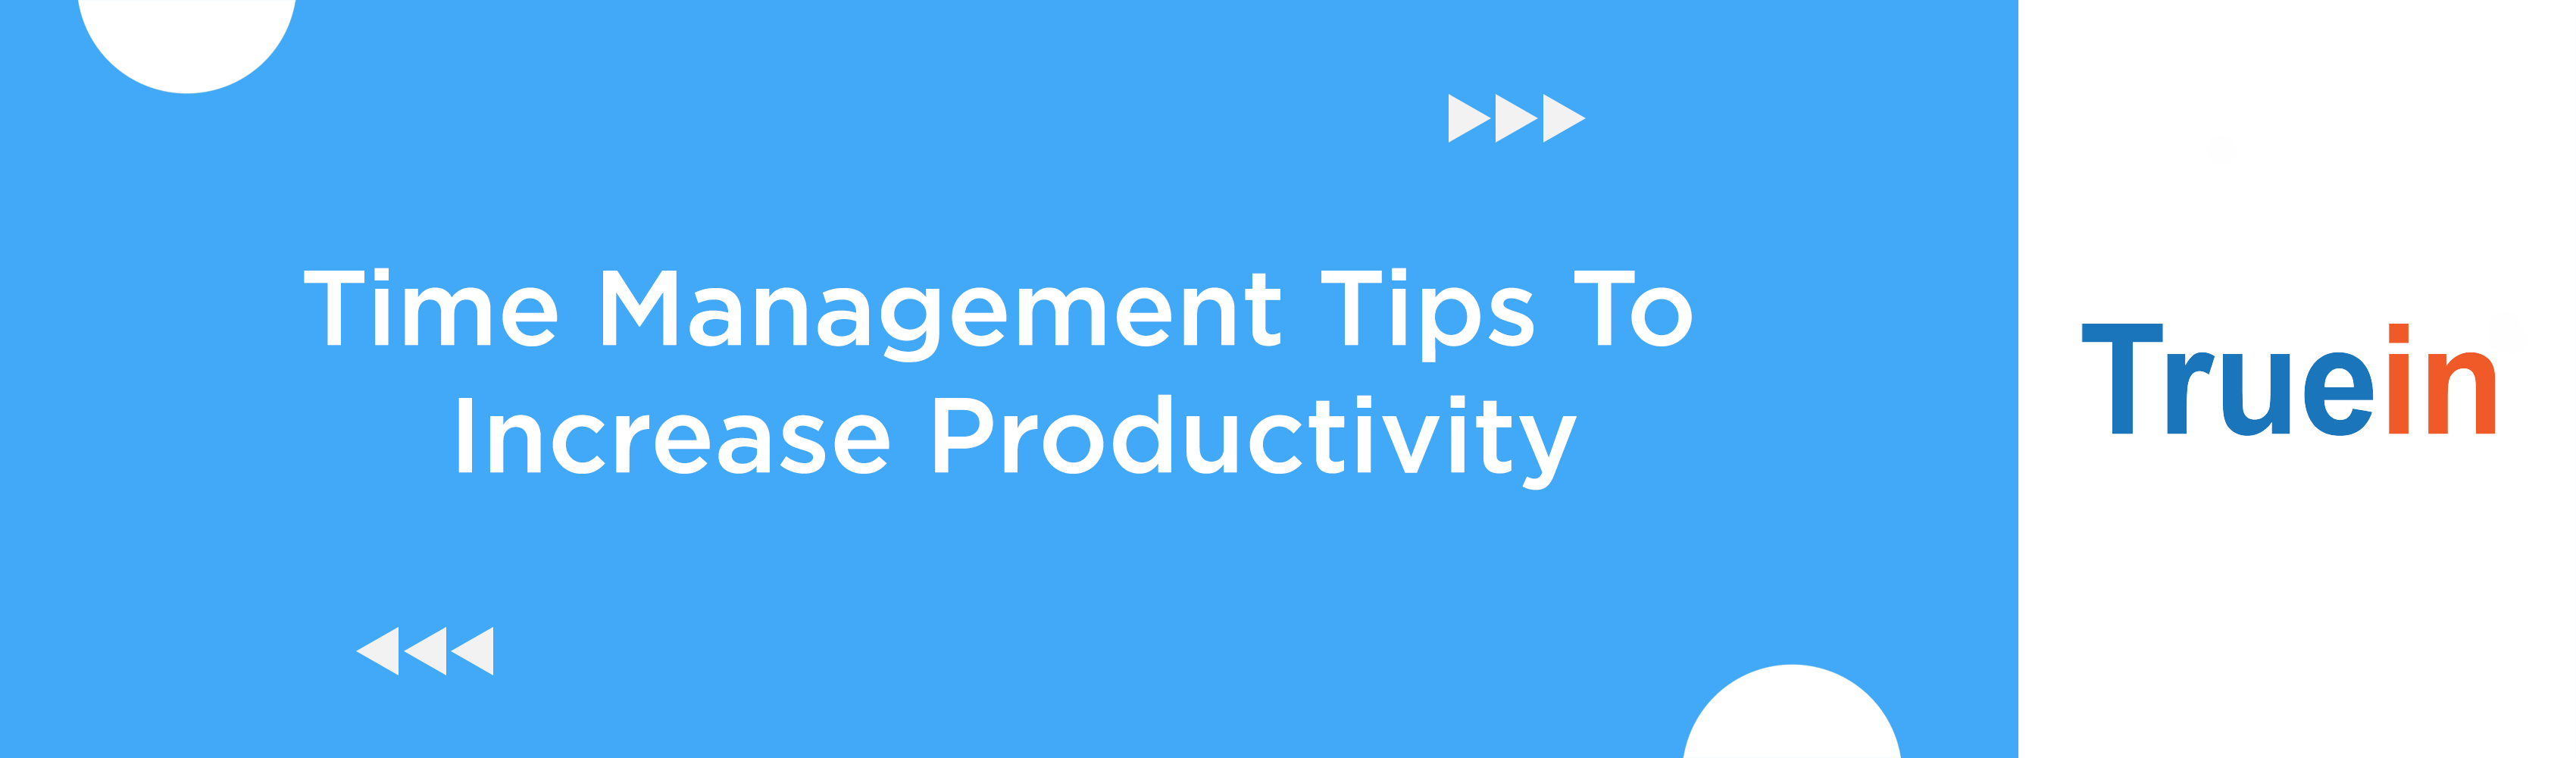 Time Management Tips To Increase Productivity